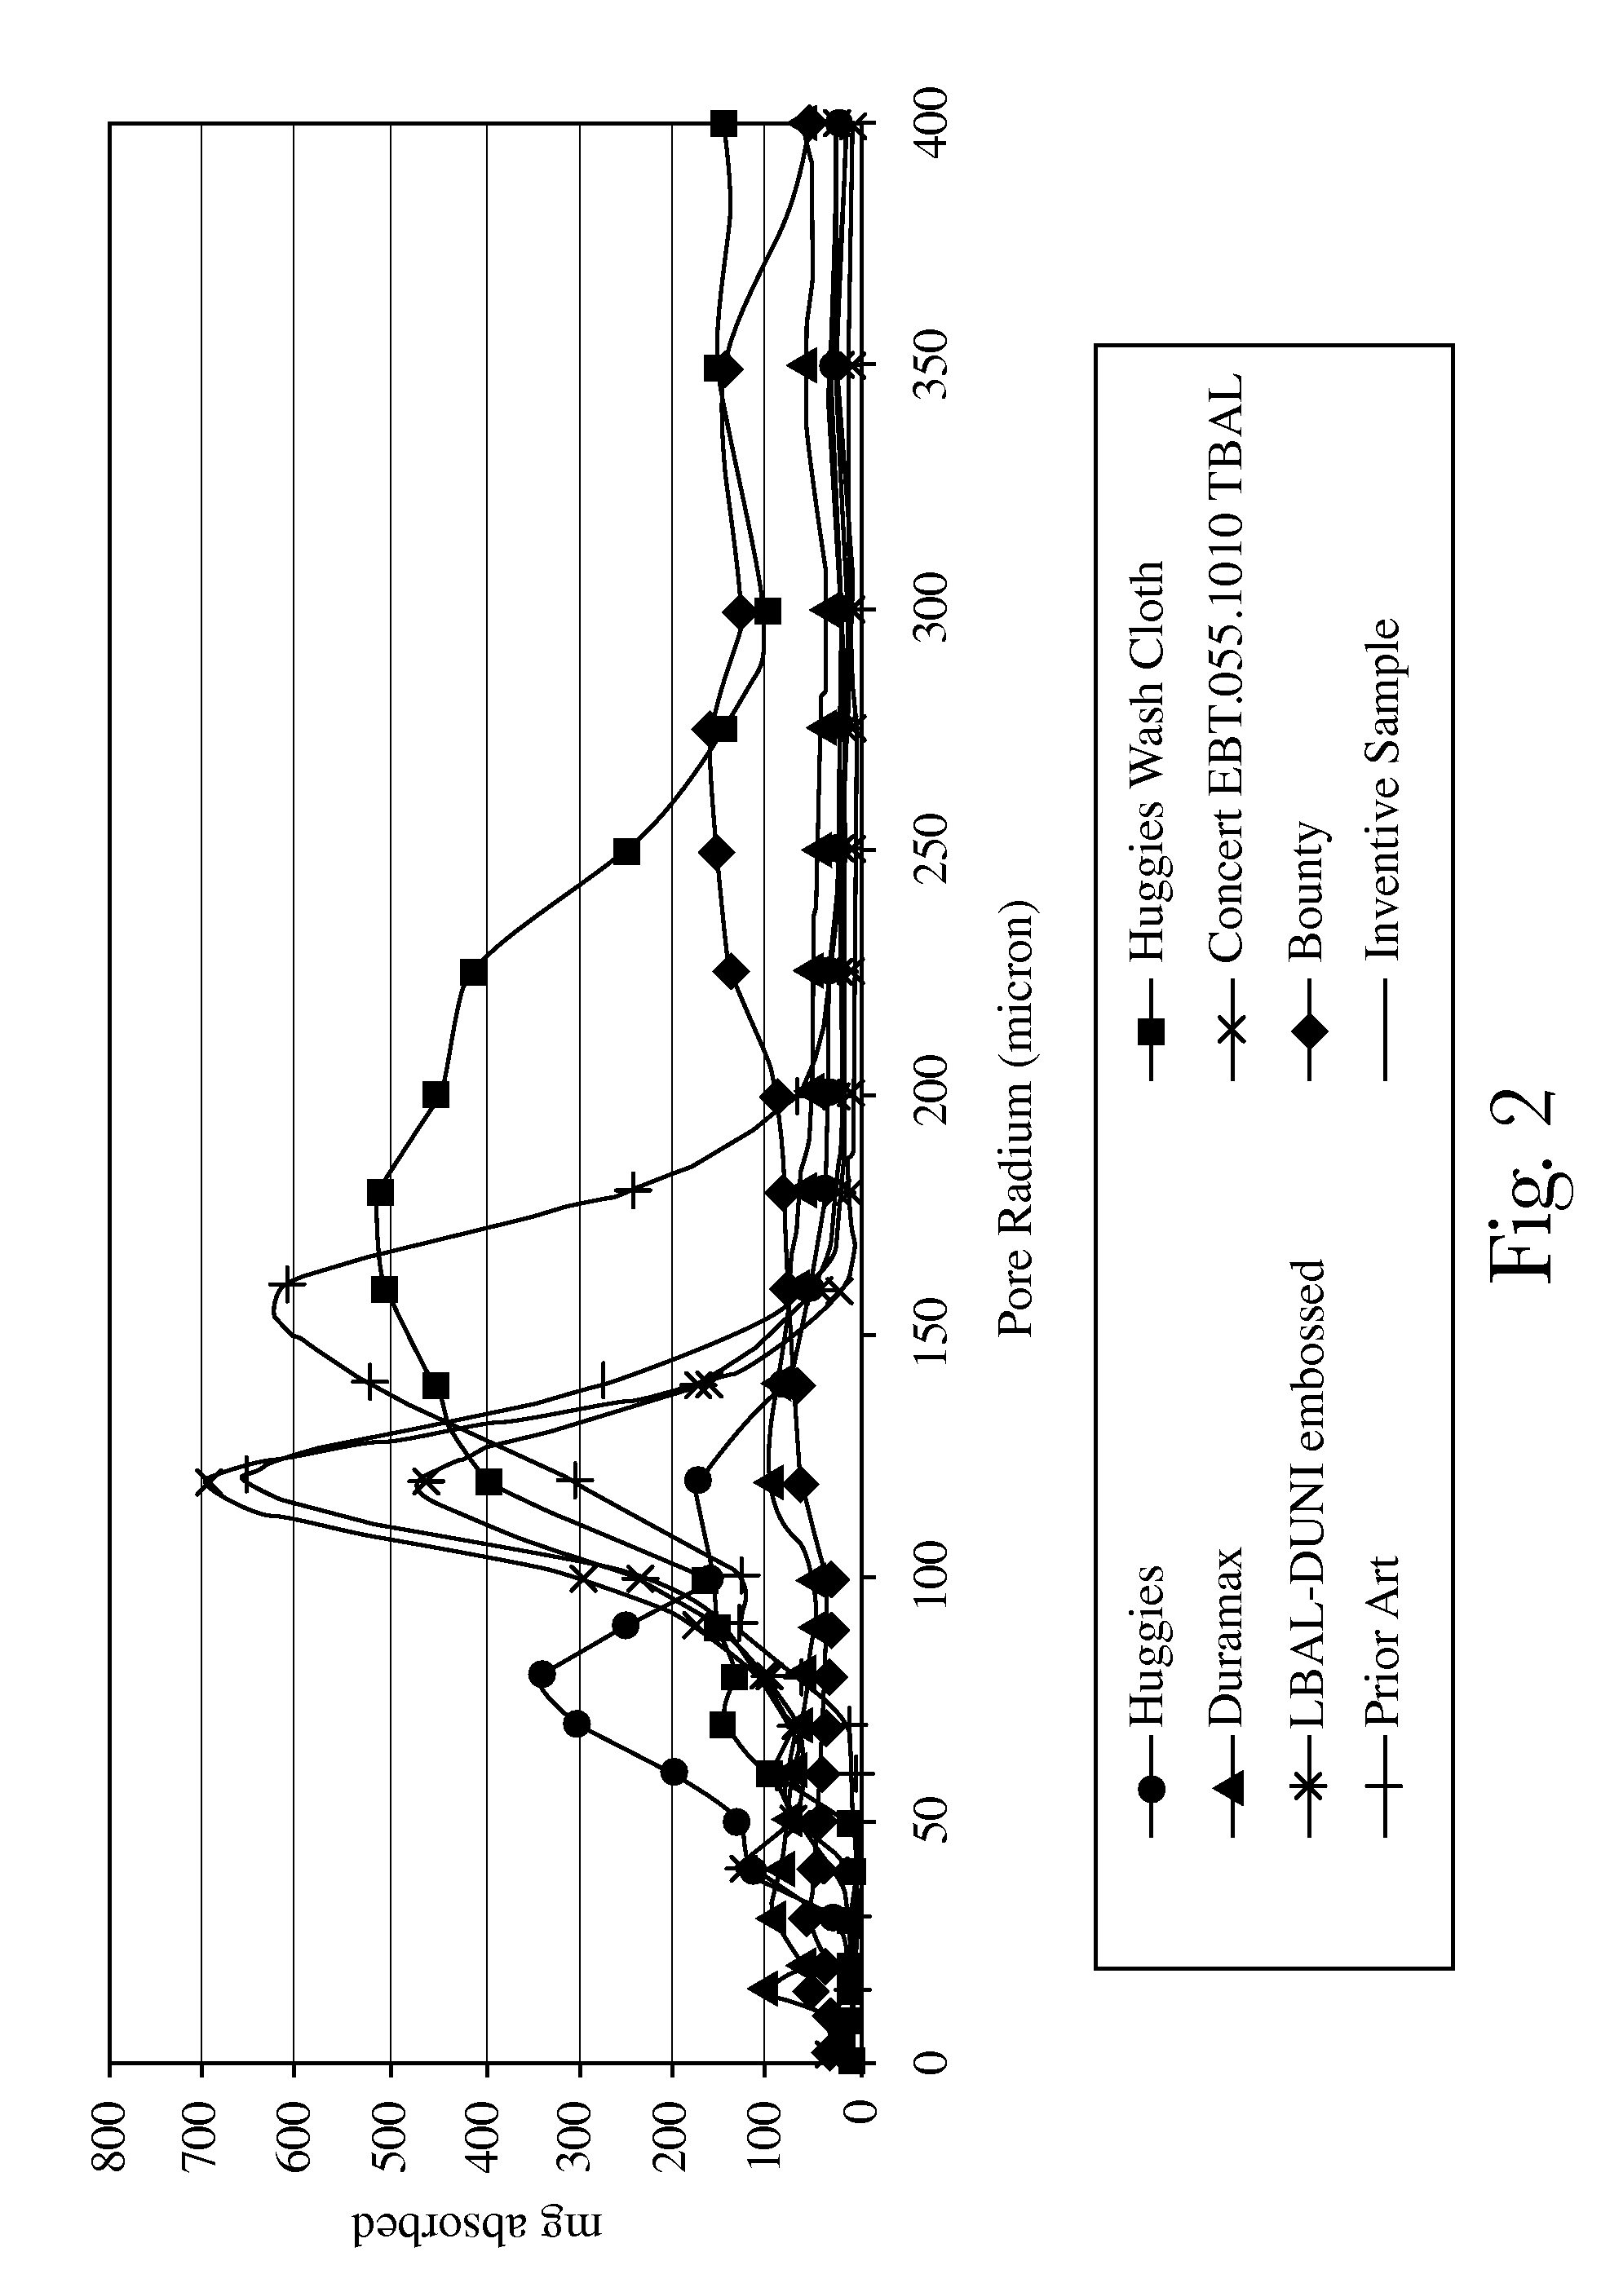 Fibrous structures and methods for making same